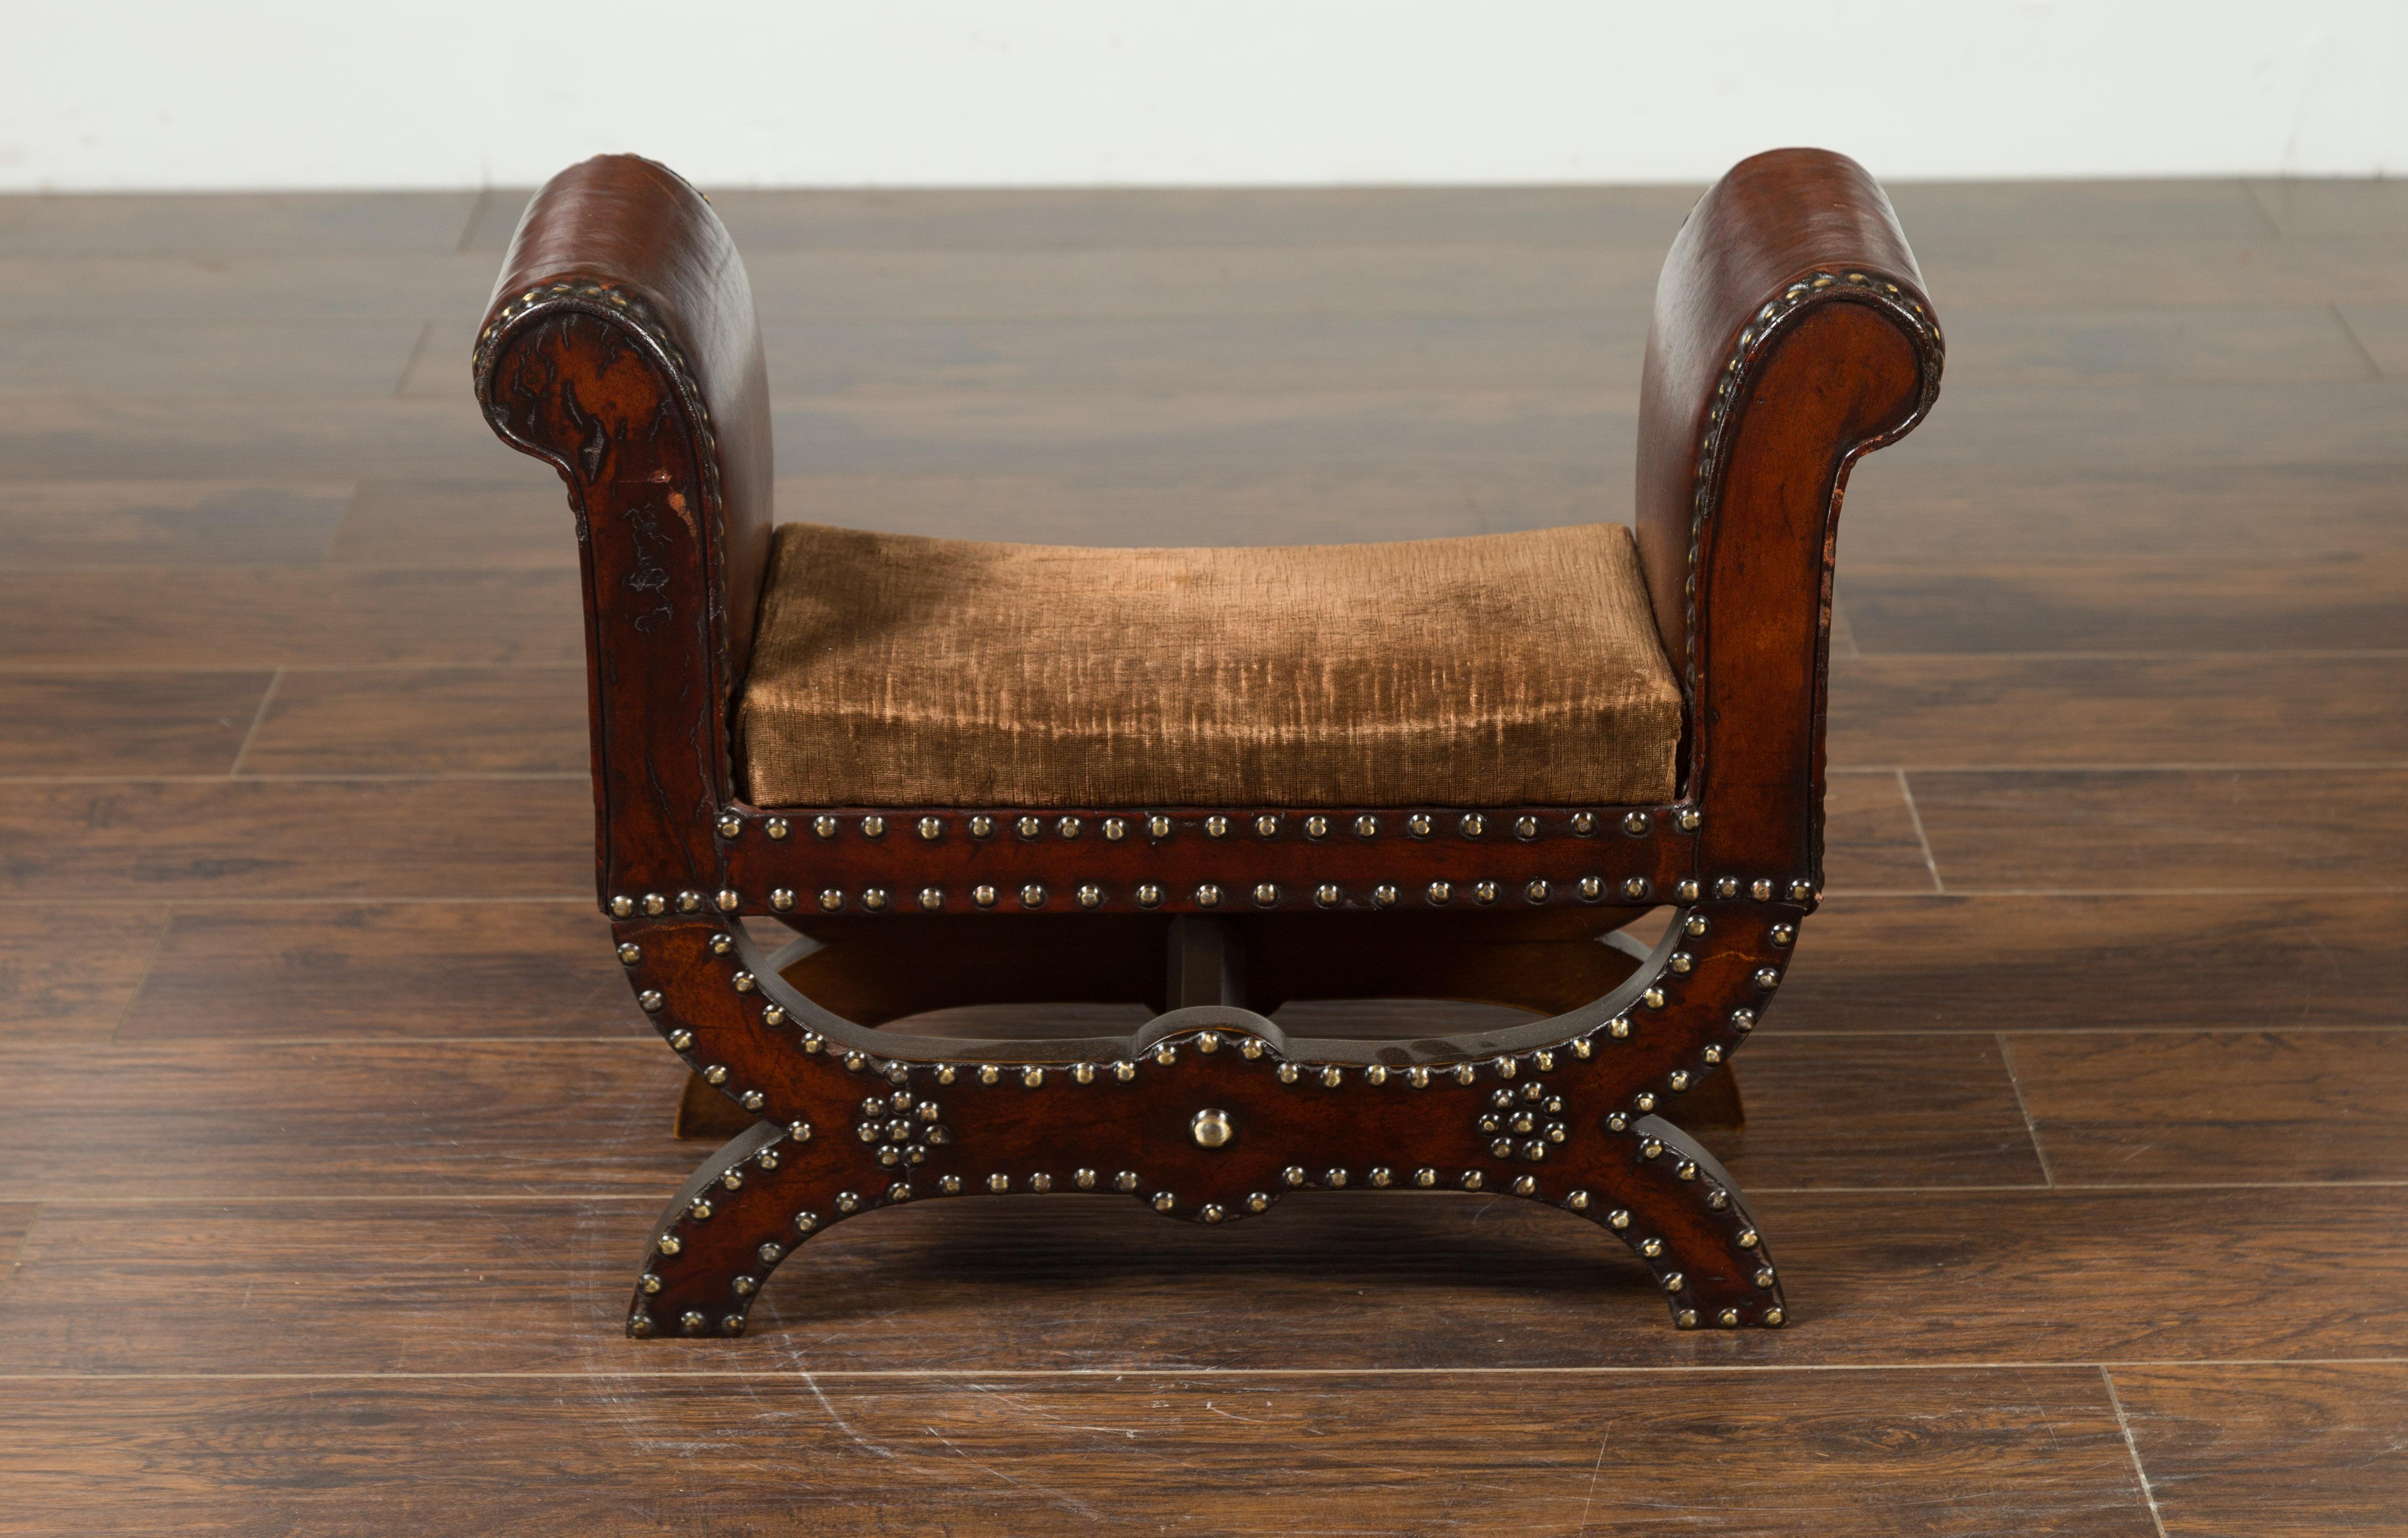 A petite English leather-bound stool from the early 20th century, with out-scrolling arms and nailheads. Created in England during the first quarter of the 20th century, this stool charms our eyes with its petite proportions and graceful silhouette.